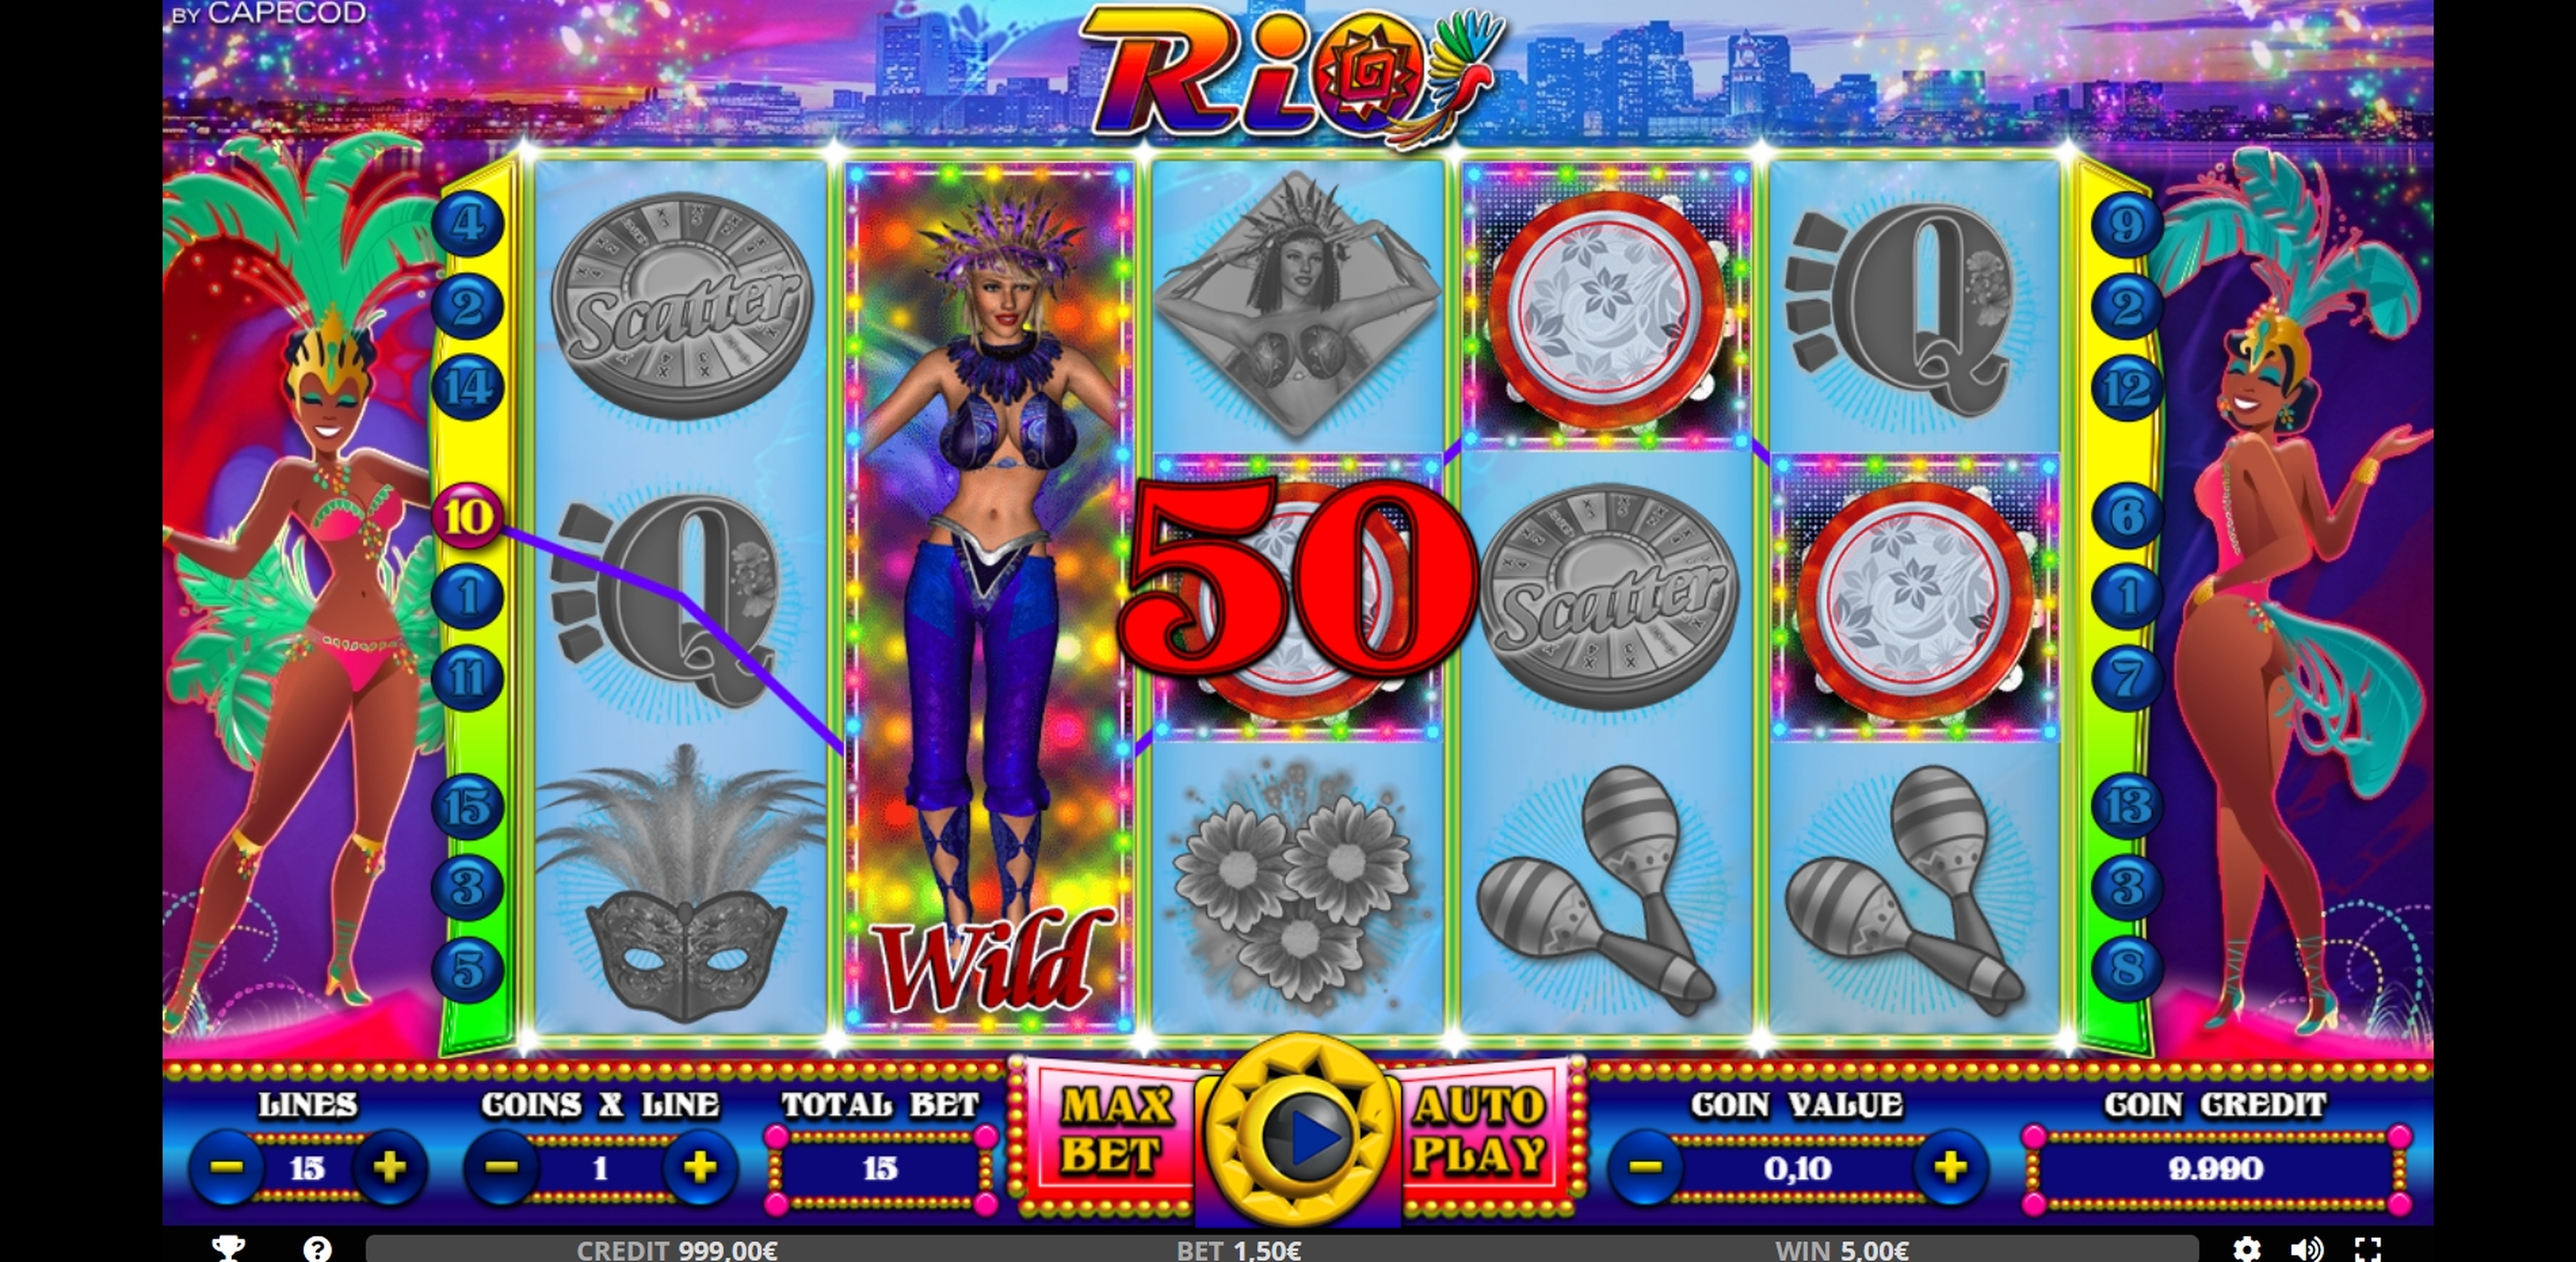 Win Money in Rio Free Slot Game by Capecod Gaming